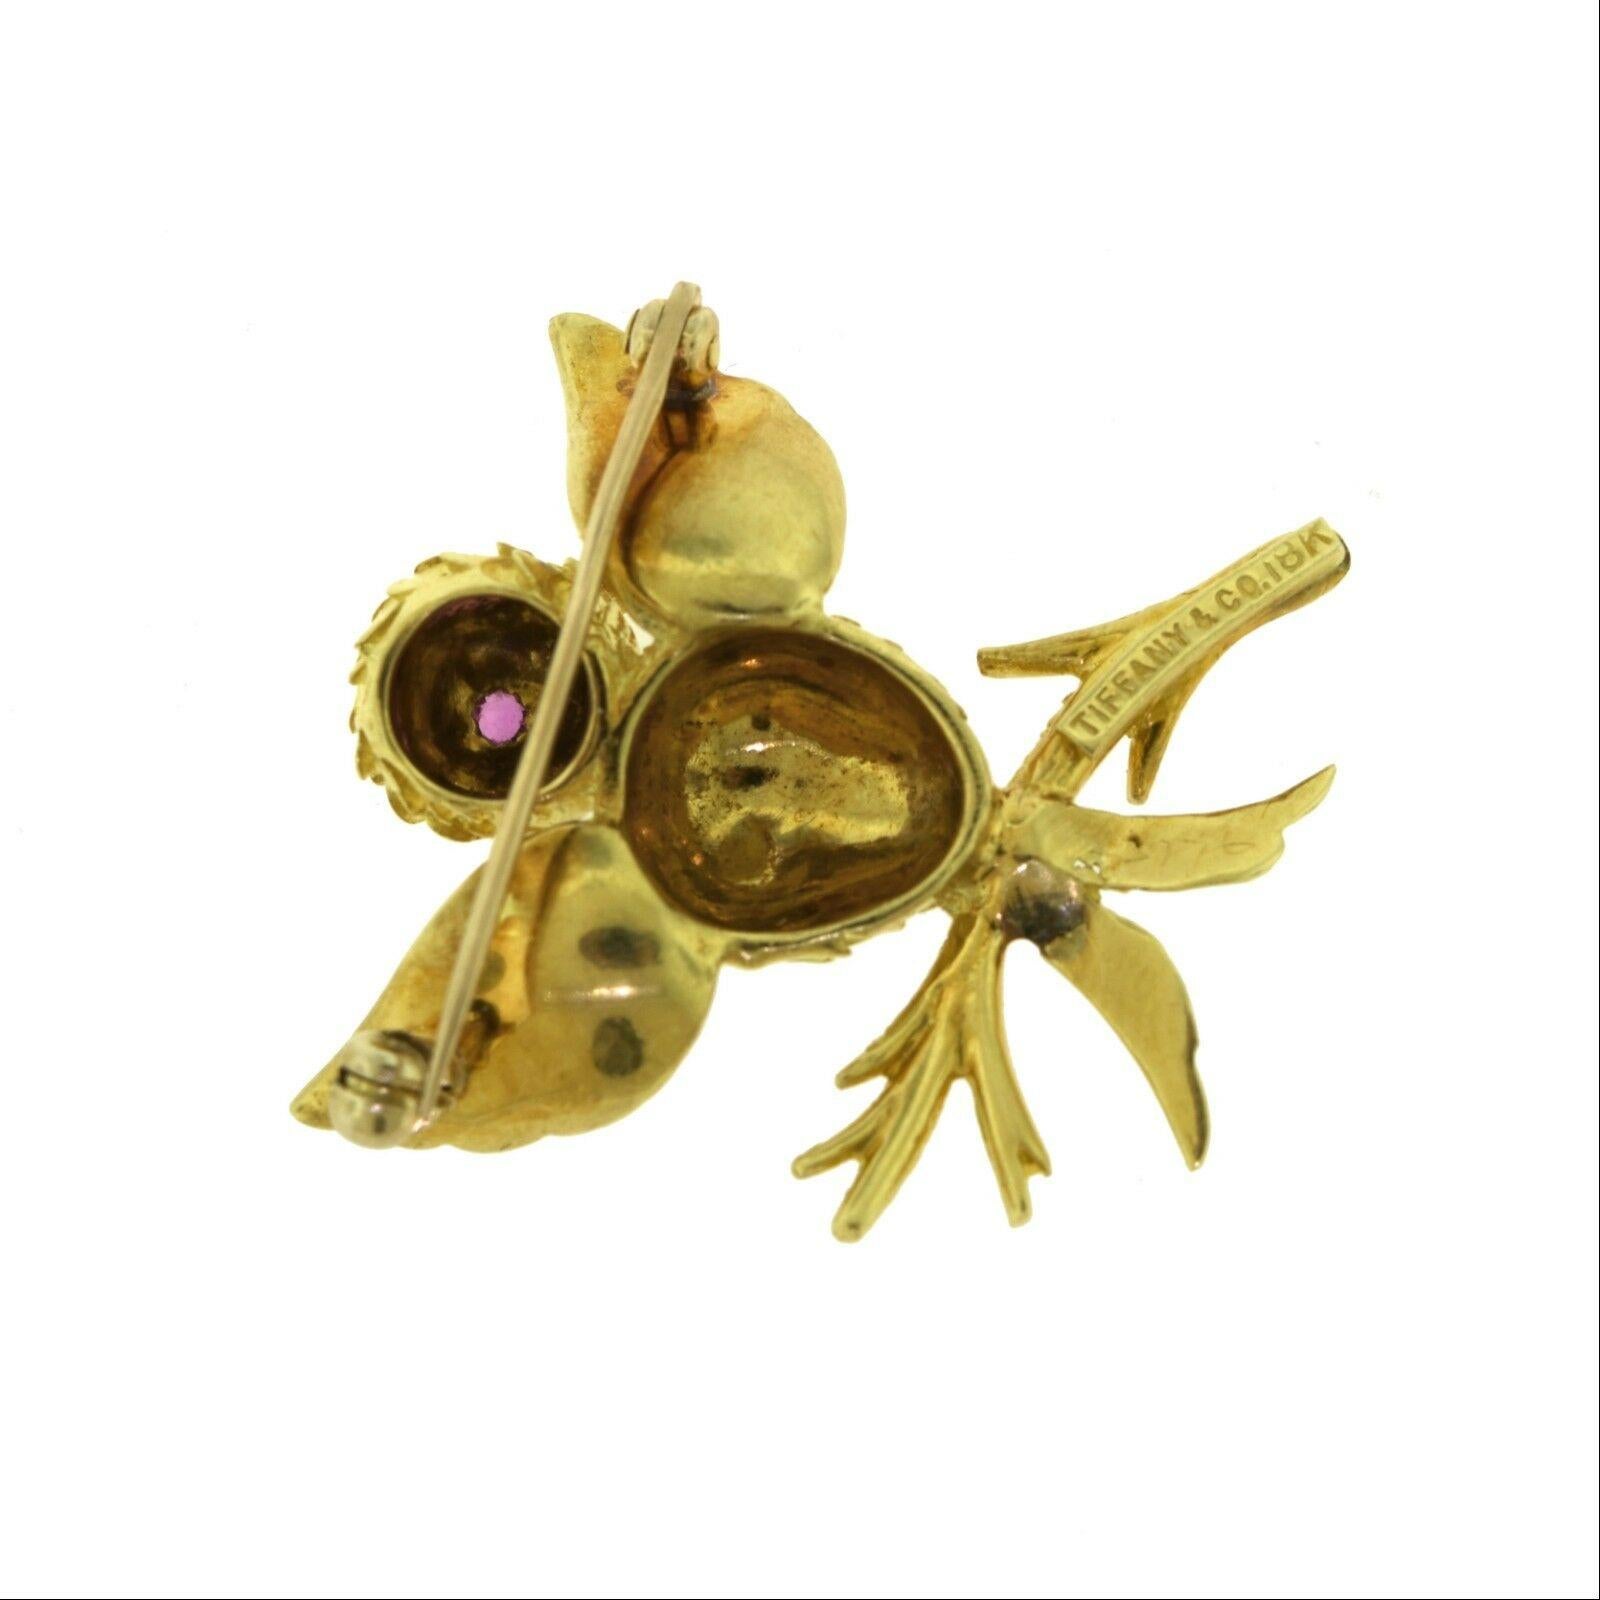 Brilliance Jewels, Miami
Questions? Call Us Anytime!
786,482,8100

Style: Bird Brooch / Pin

Metal: Yellow Gold

Metal Purity: 18k

Stones: 1 Round Ruby (eye)

Total Item Weight (grams): 8.7

​​​​​​​Brooch Length: approx. 1 inch

​​​​​​​Brooch